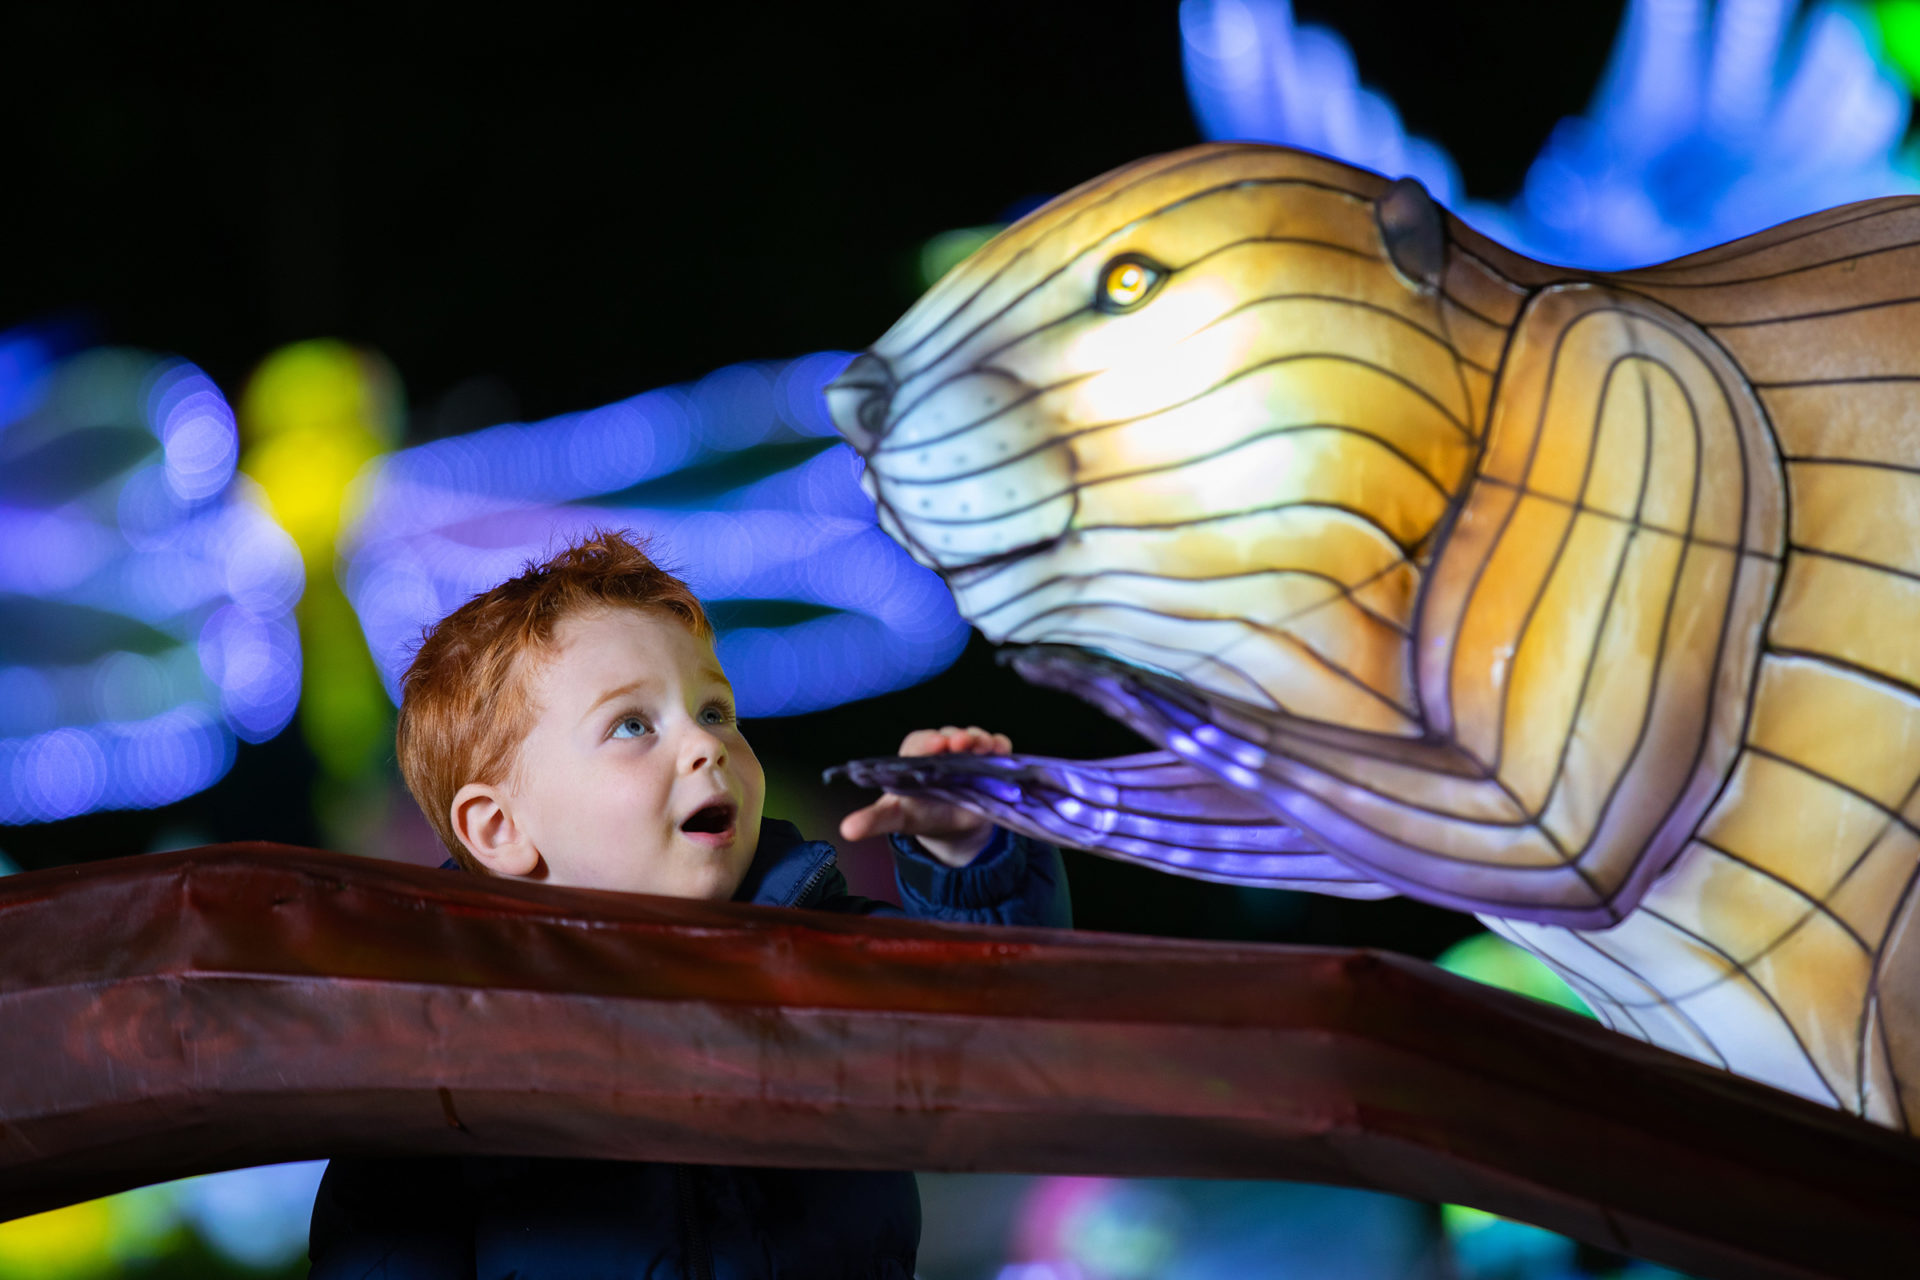 Wild Lights At Dublin Zoo Returns With A Brand New Theme ‘The Magic Of